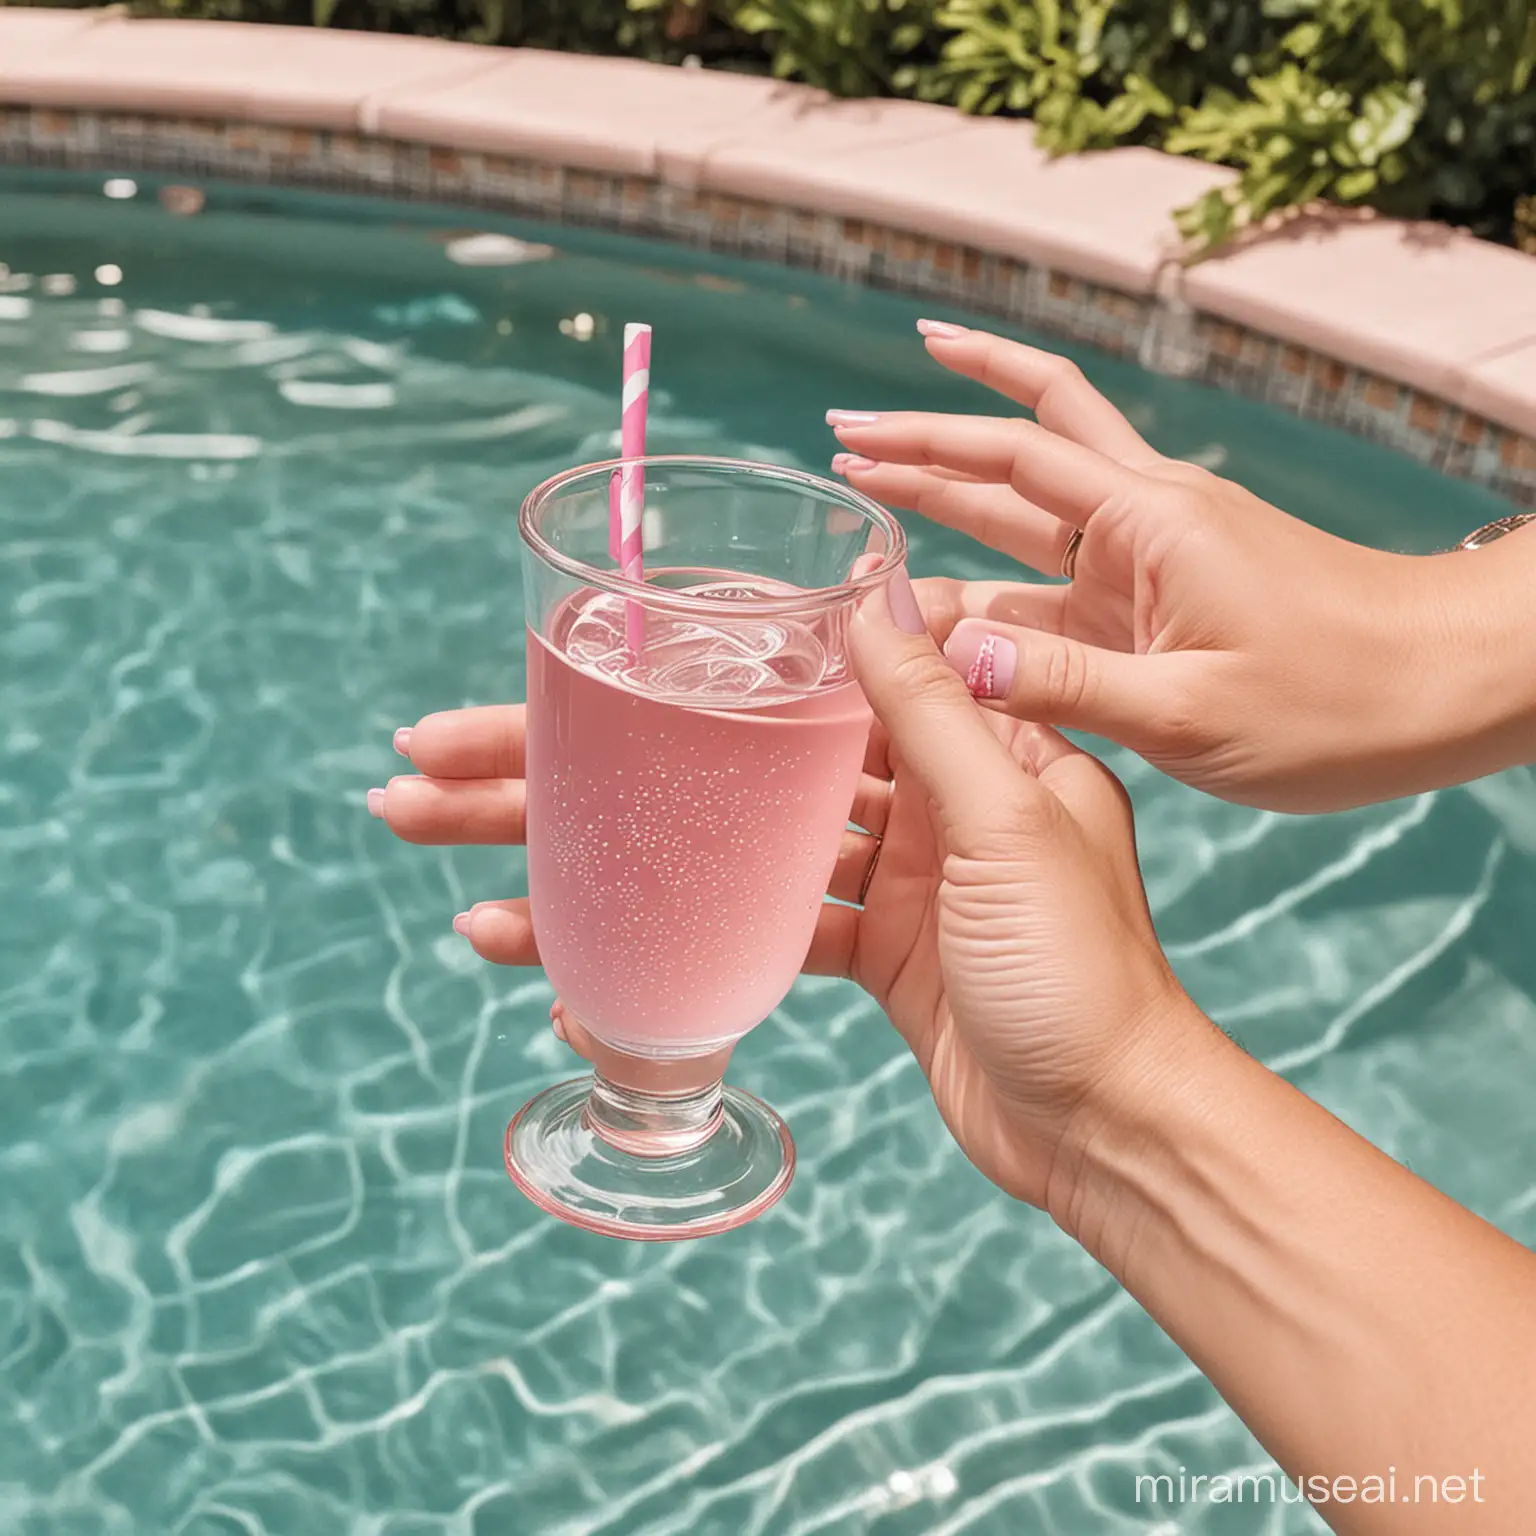 Pool party pink decor with  a hand holding a shot glass forward